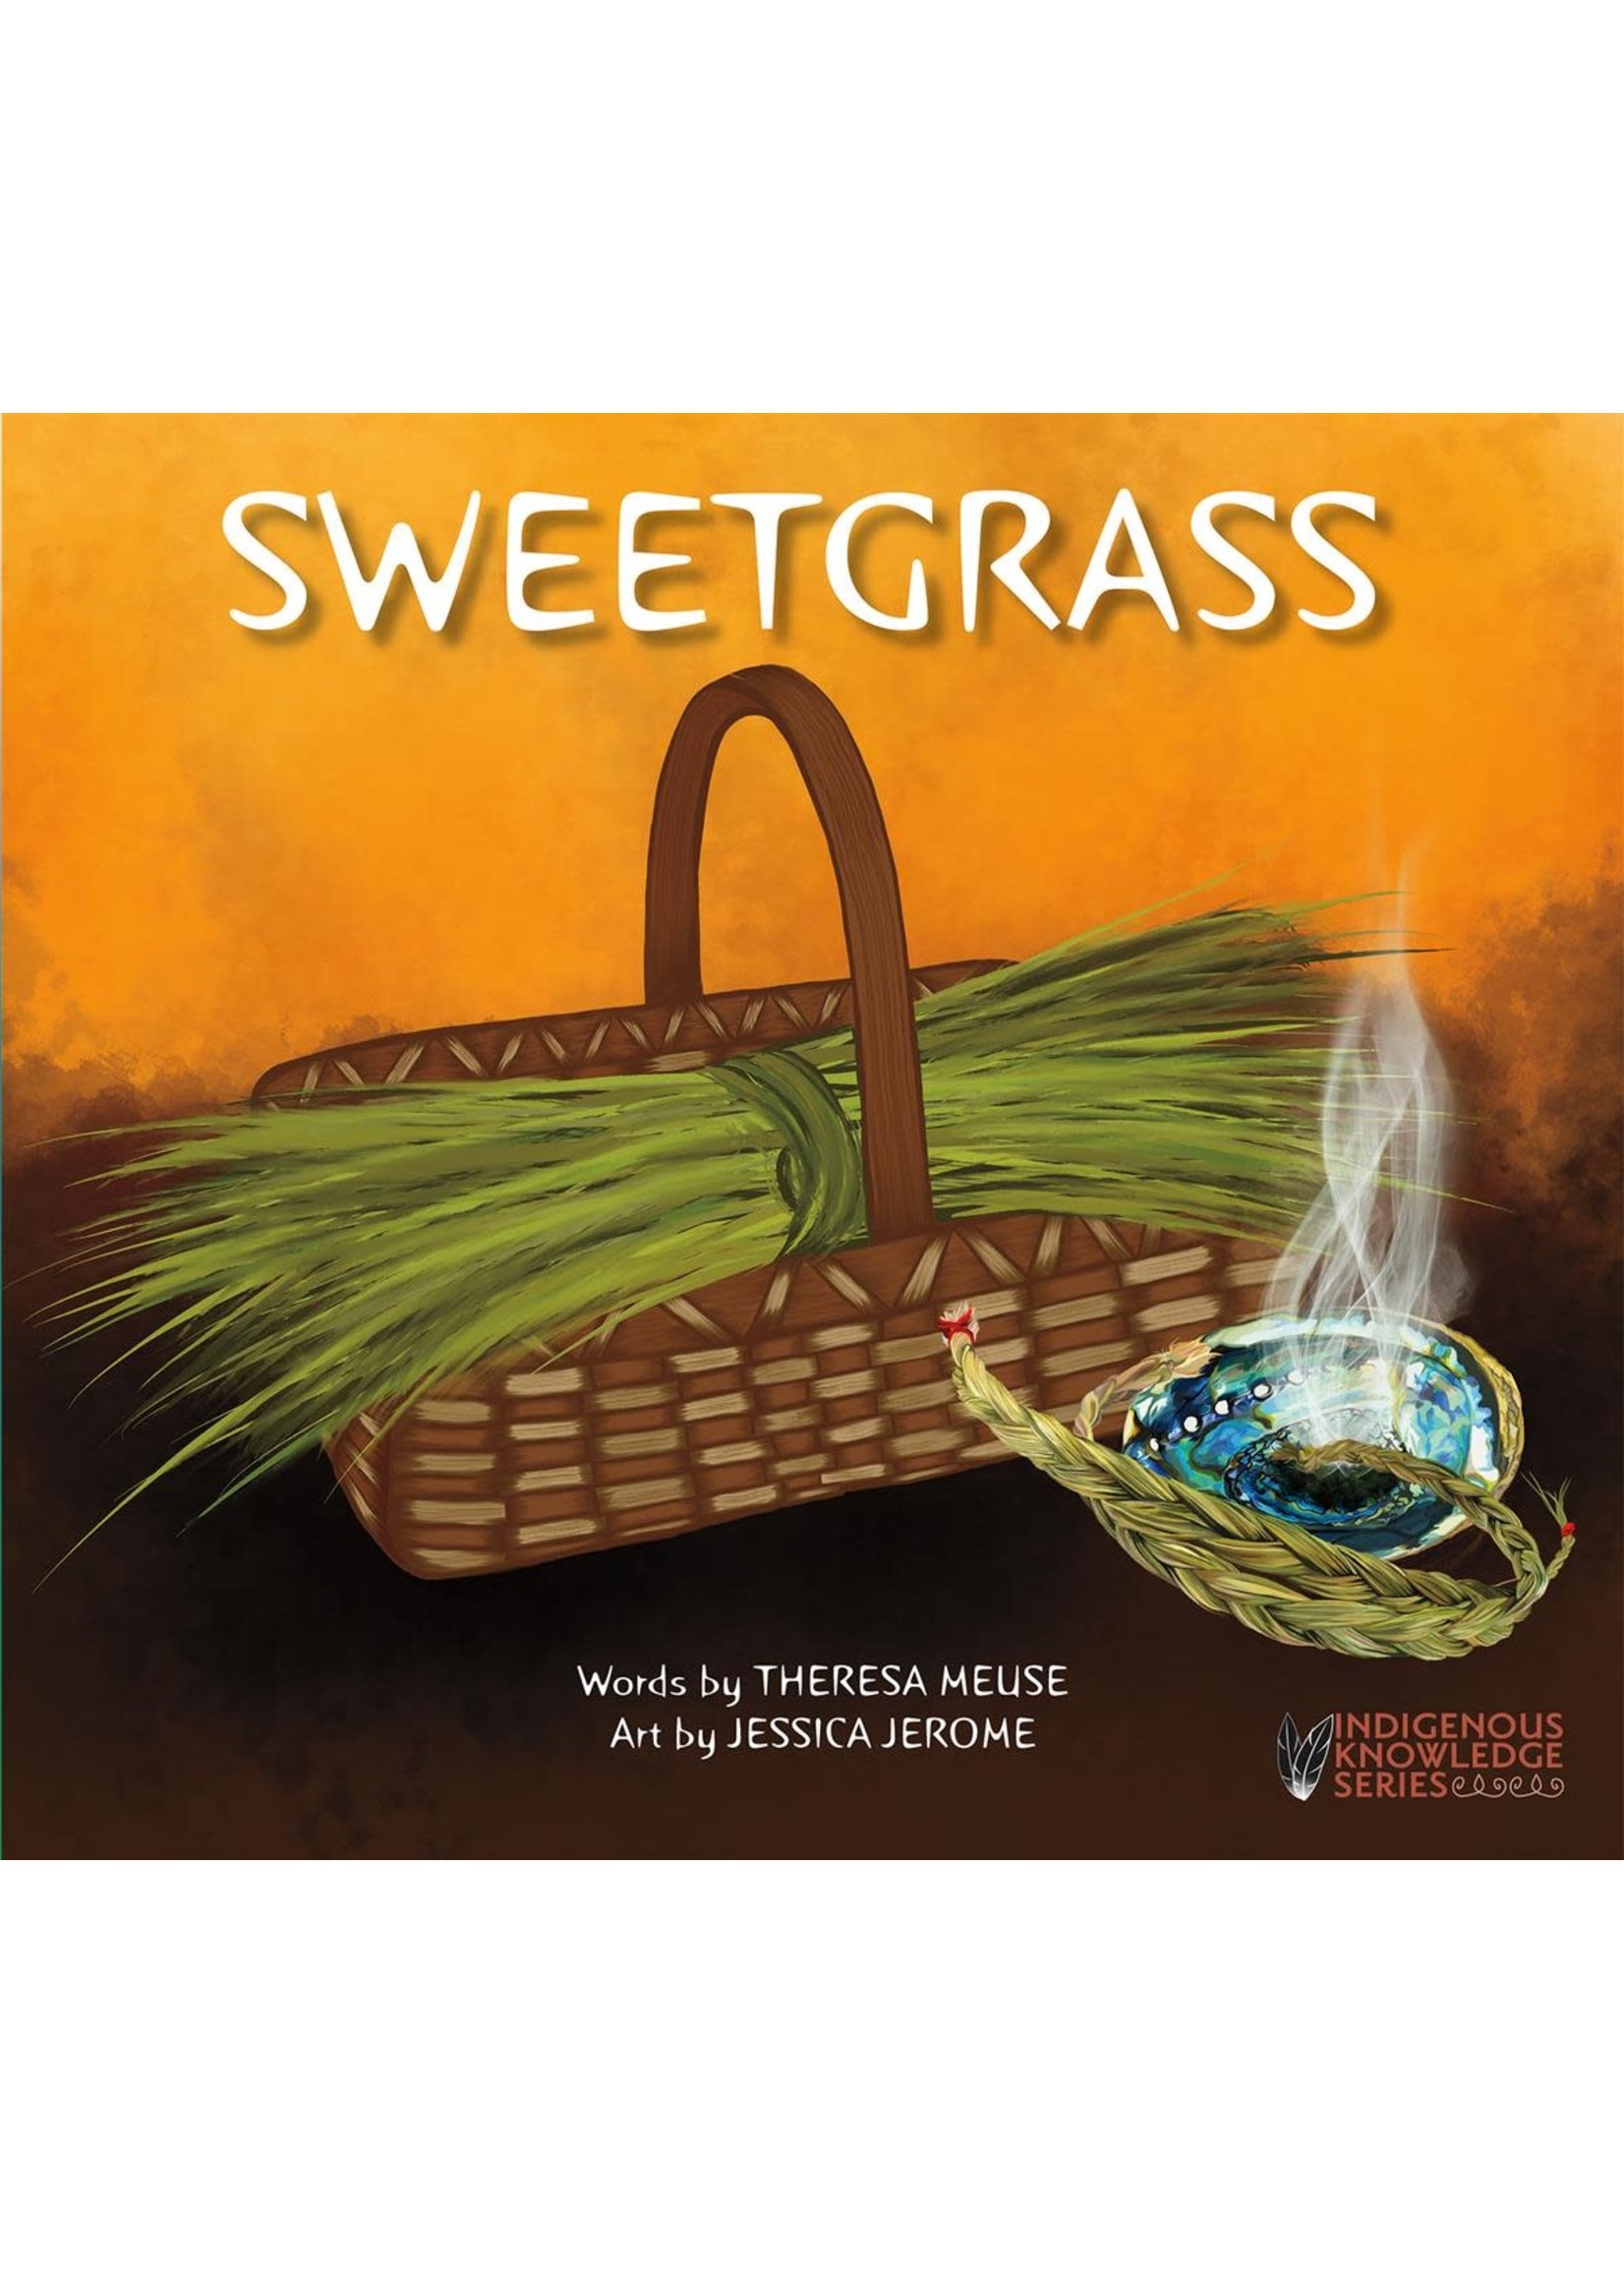 Sweetgrass by Theresa Meuse